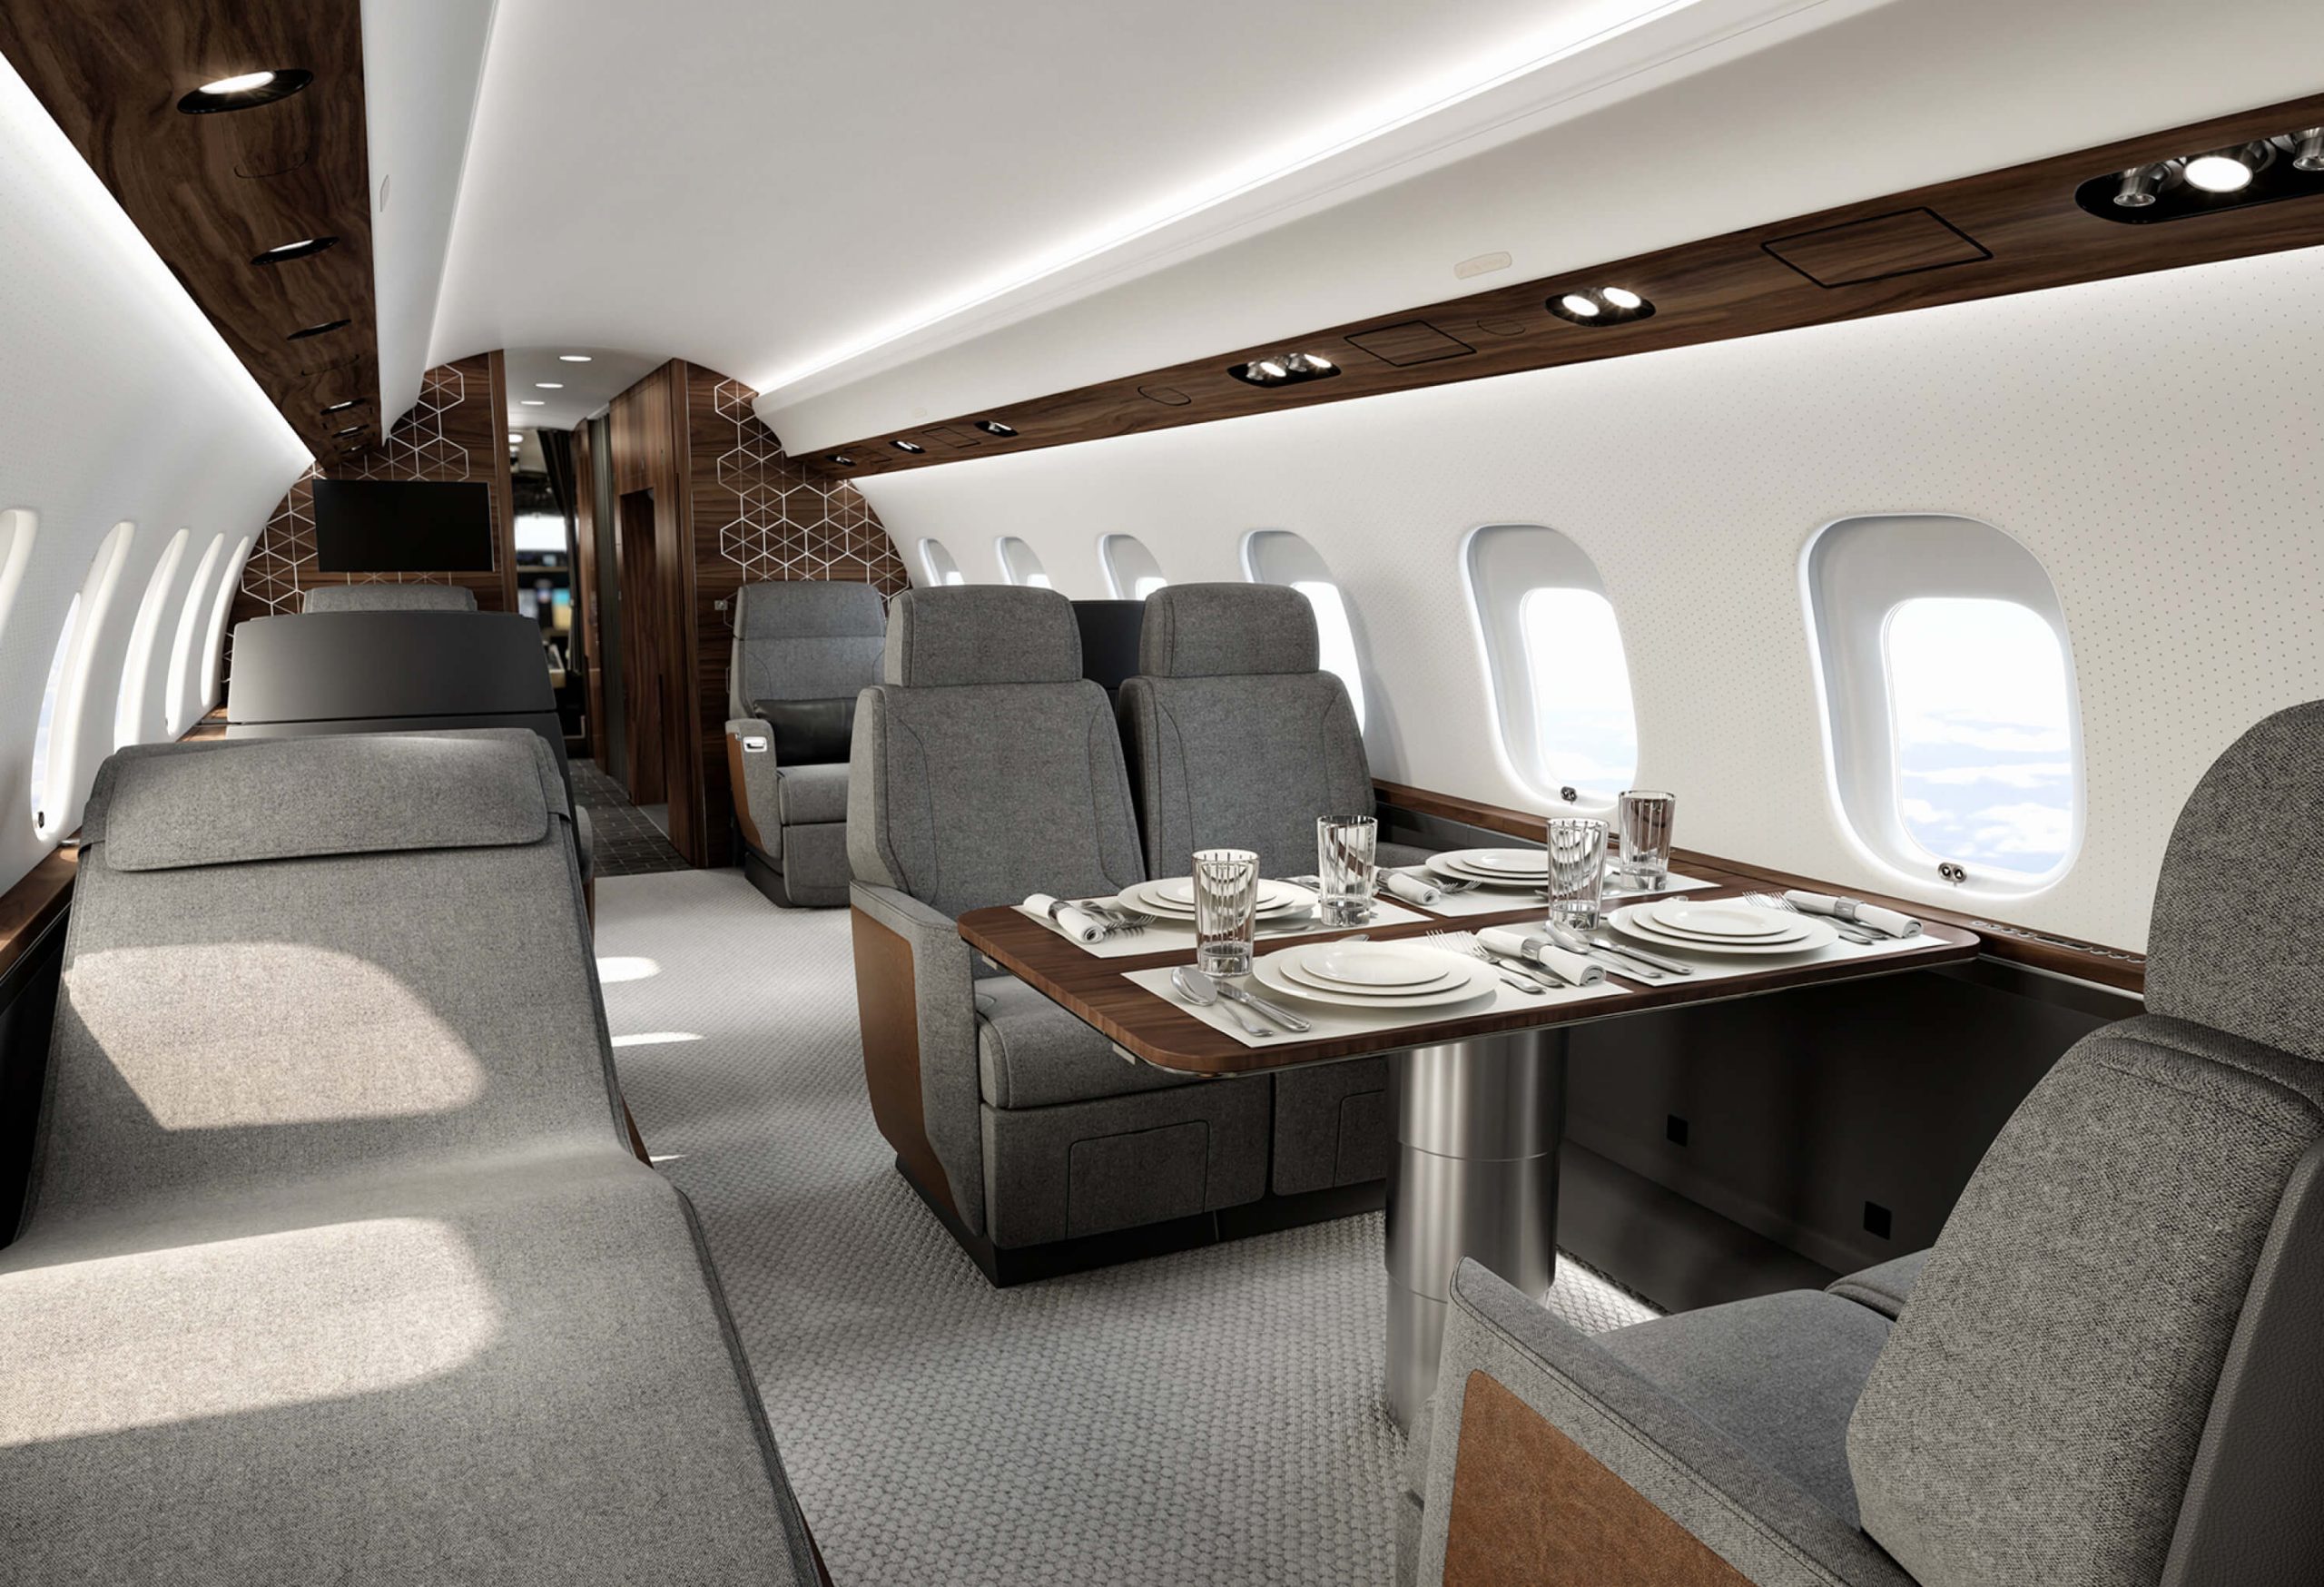 Luxury private airplane with set table